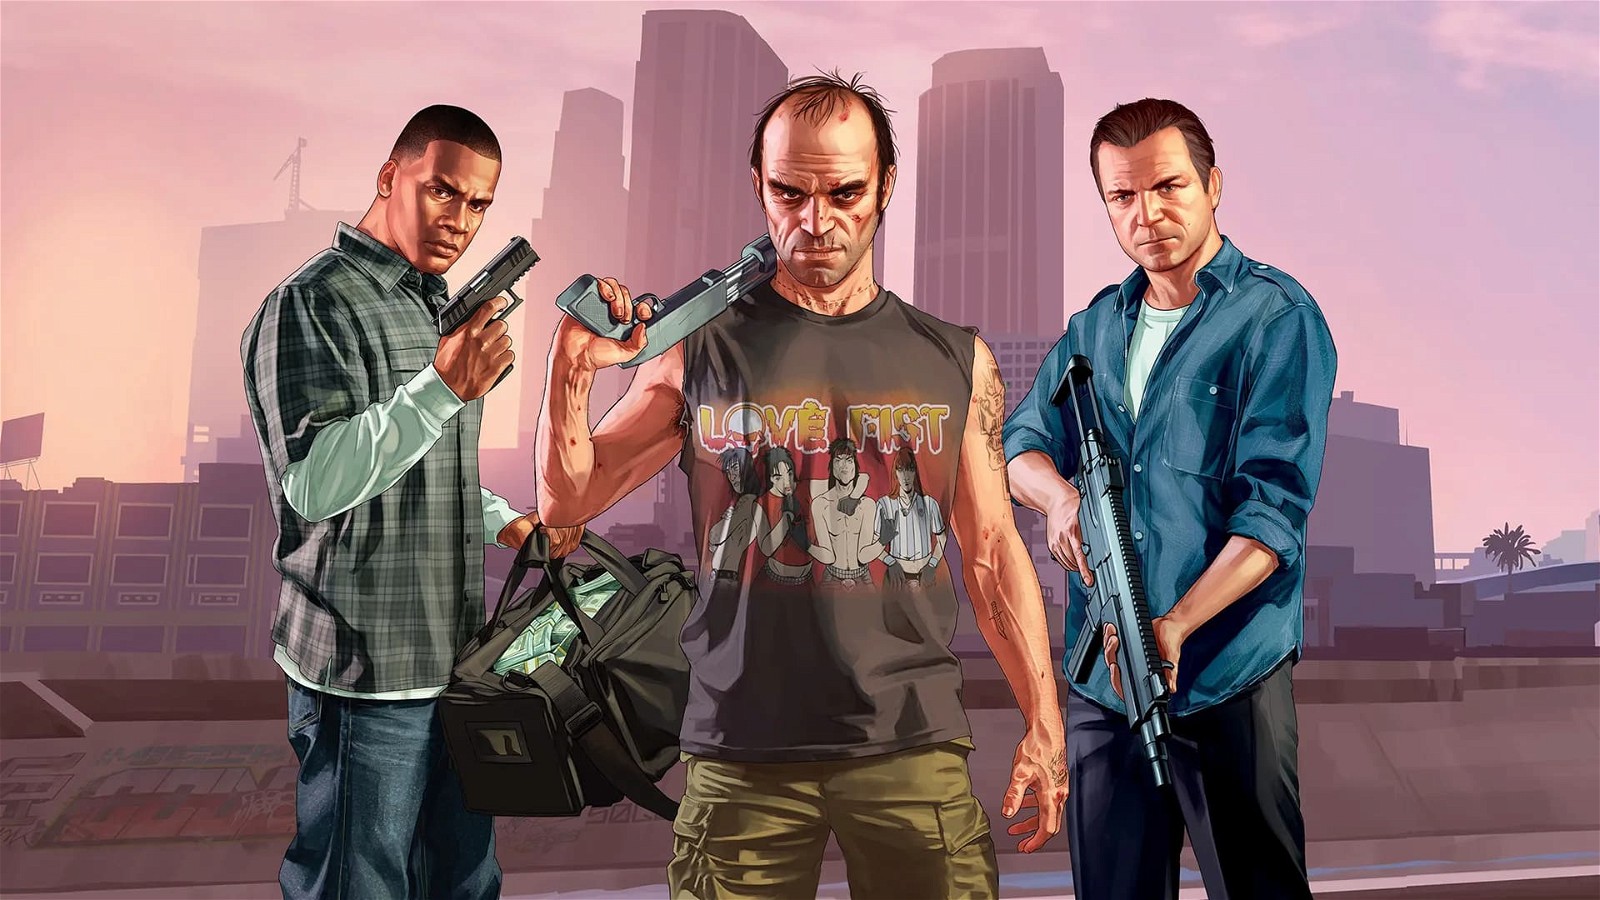 The recent GTA 5 leak revealed the source code of the game and other confidential information.